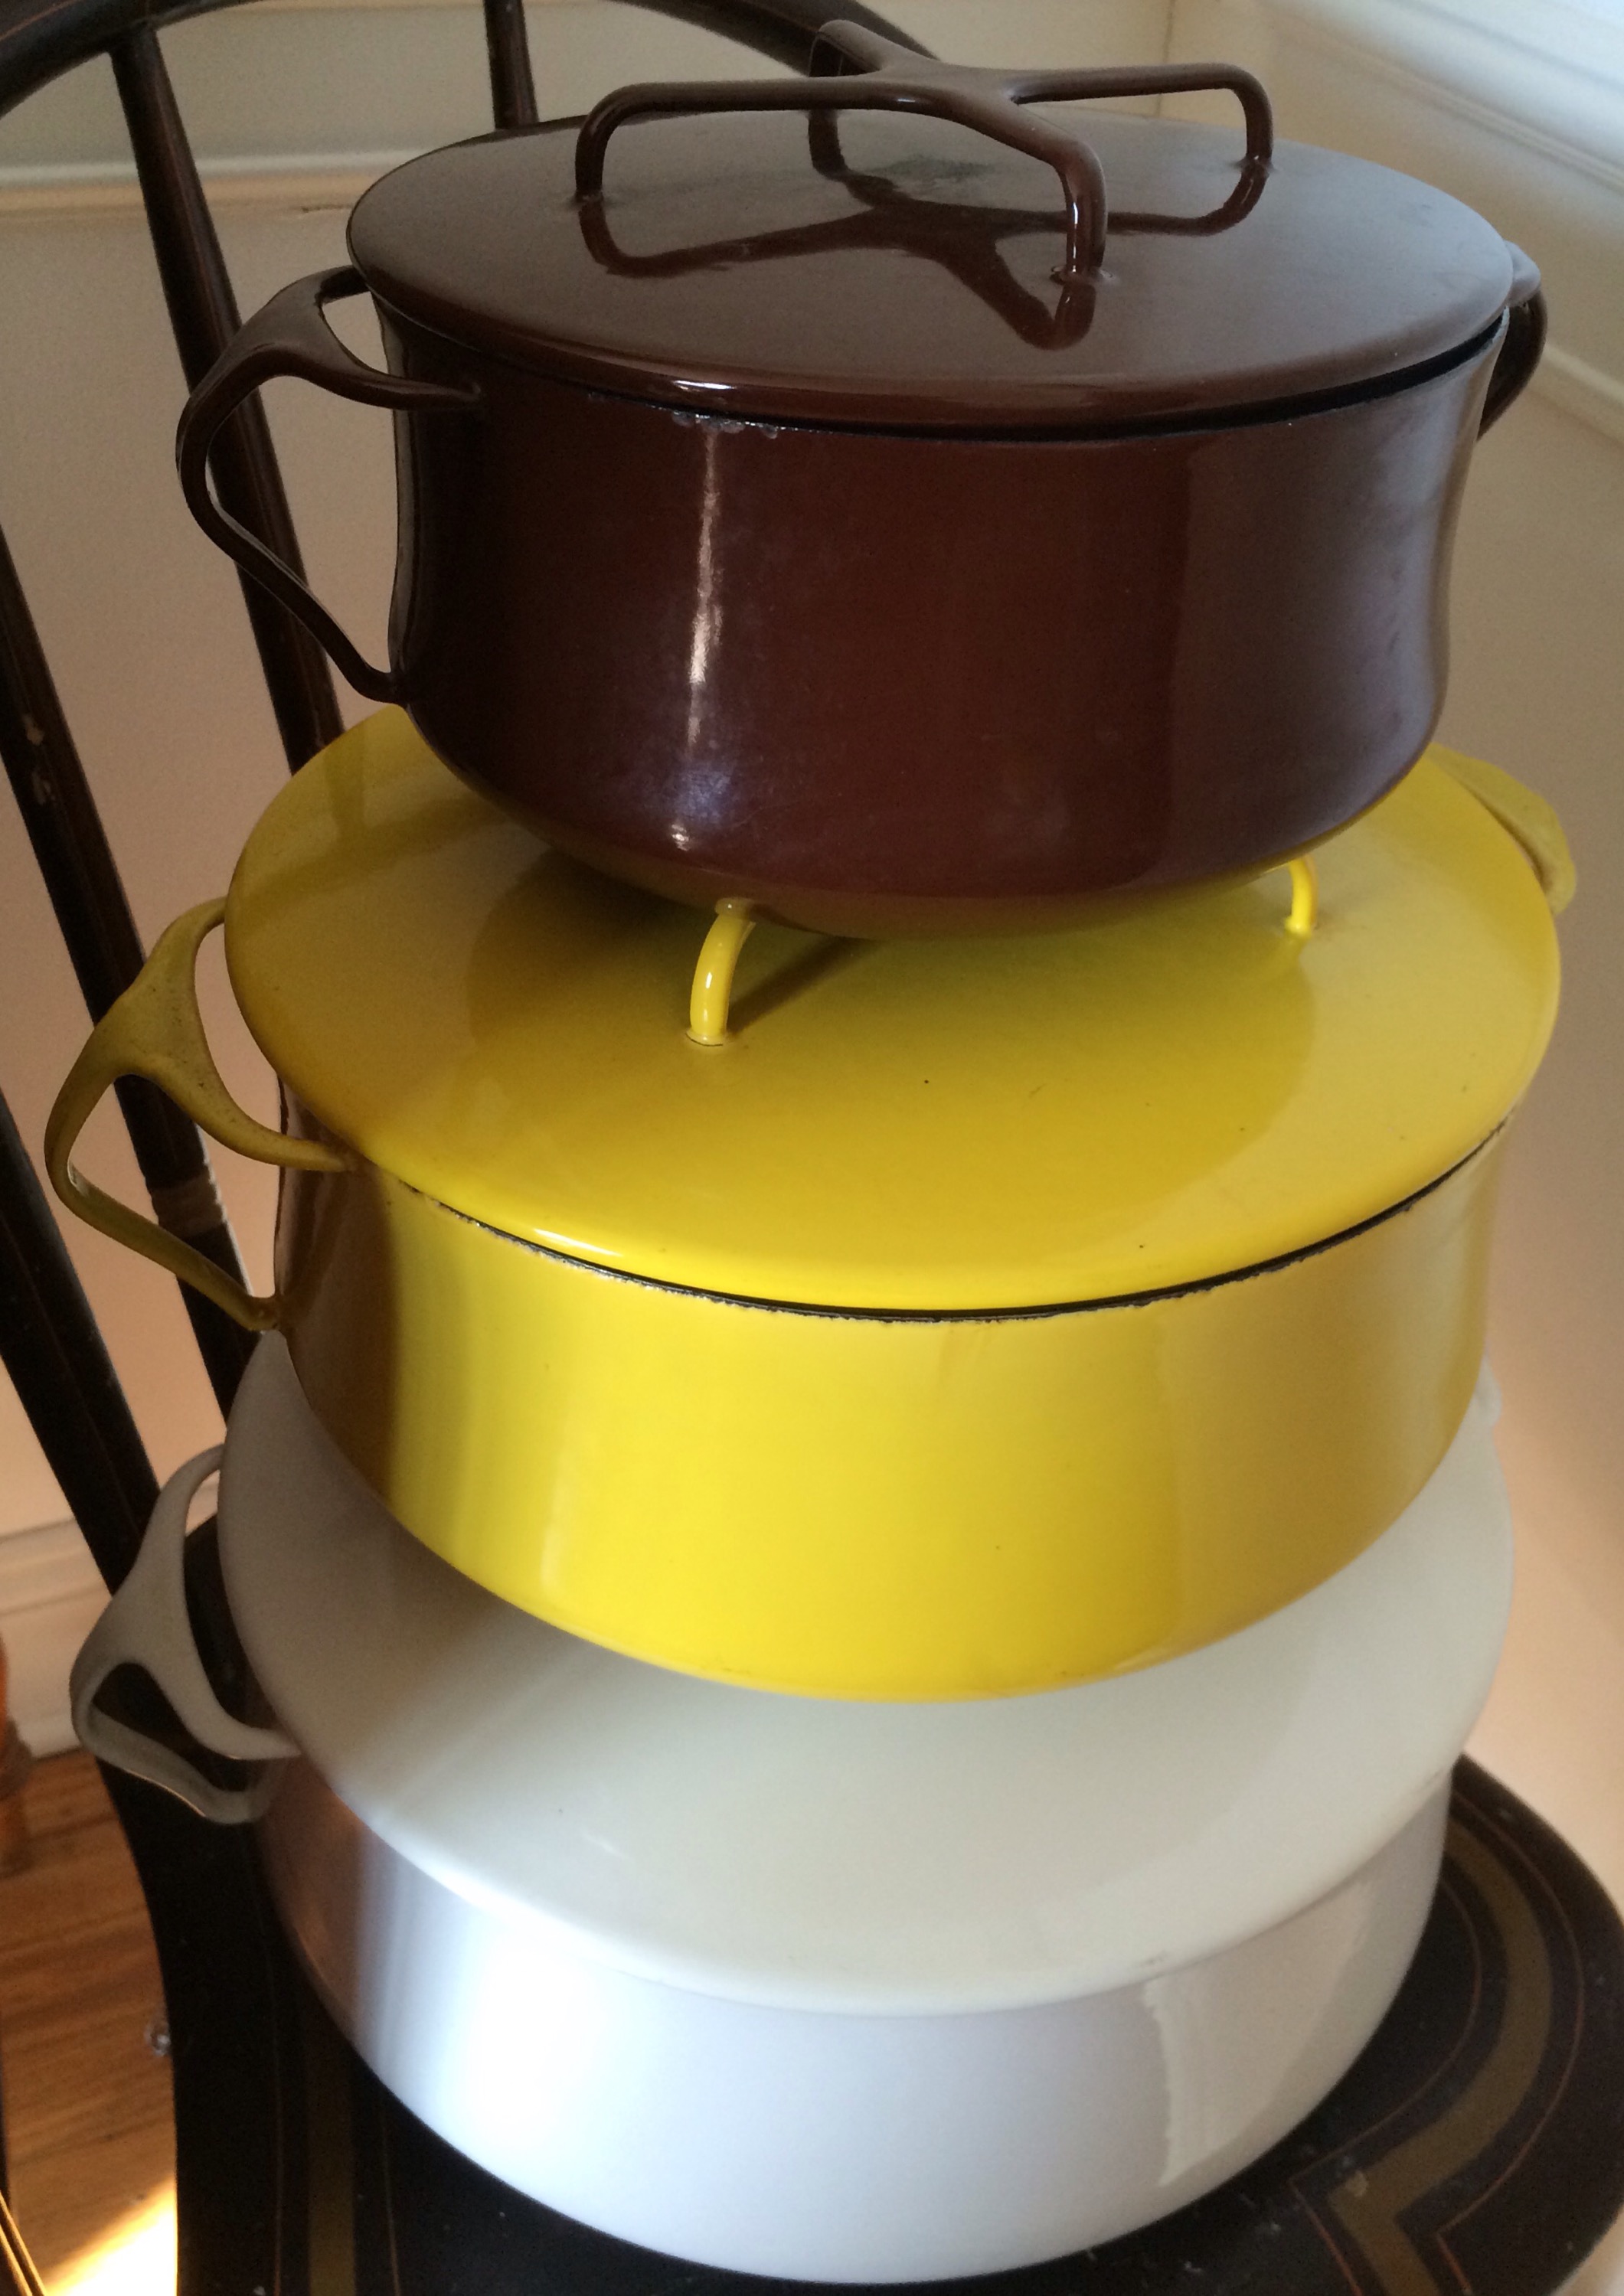 true vintage: collecting and using dansk | chestercountyramblings